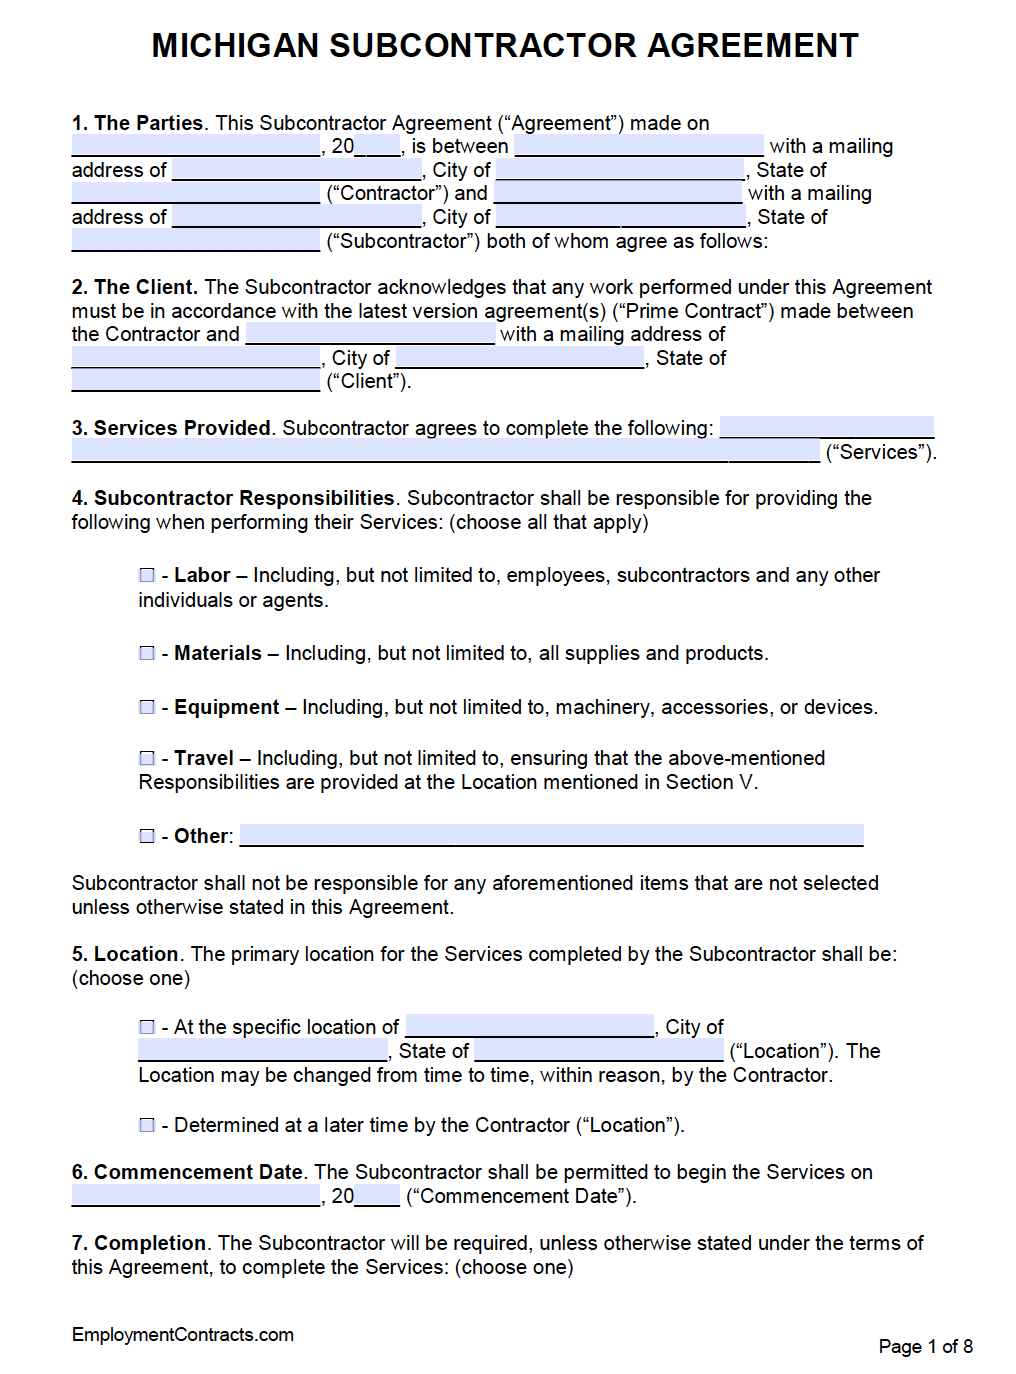 Michigan Subcontractor Agreement Template PDF Word